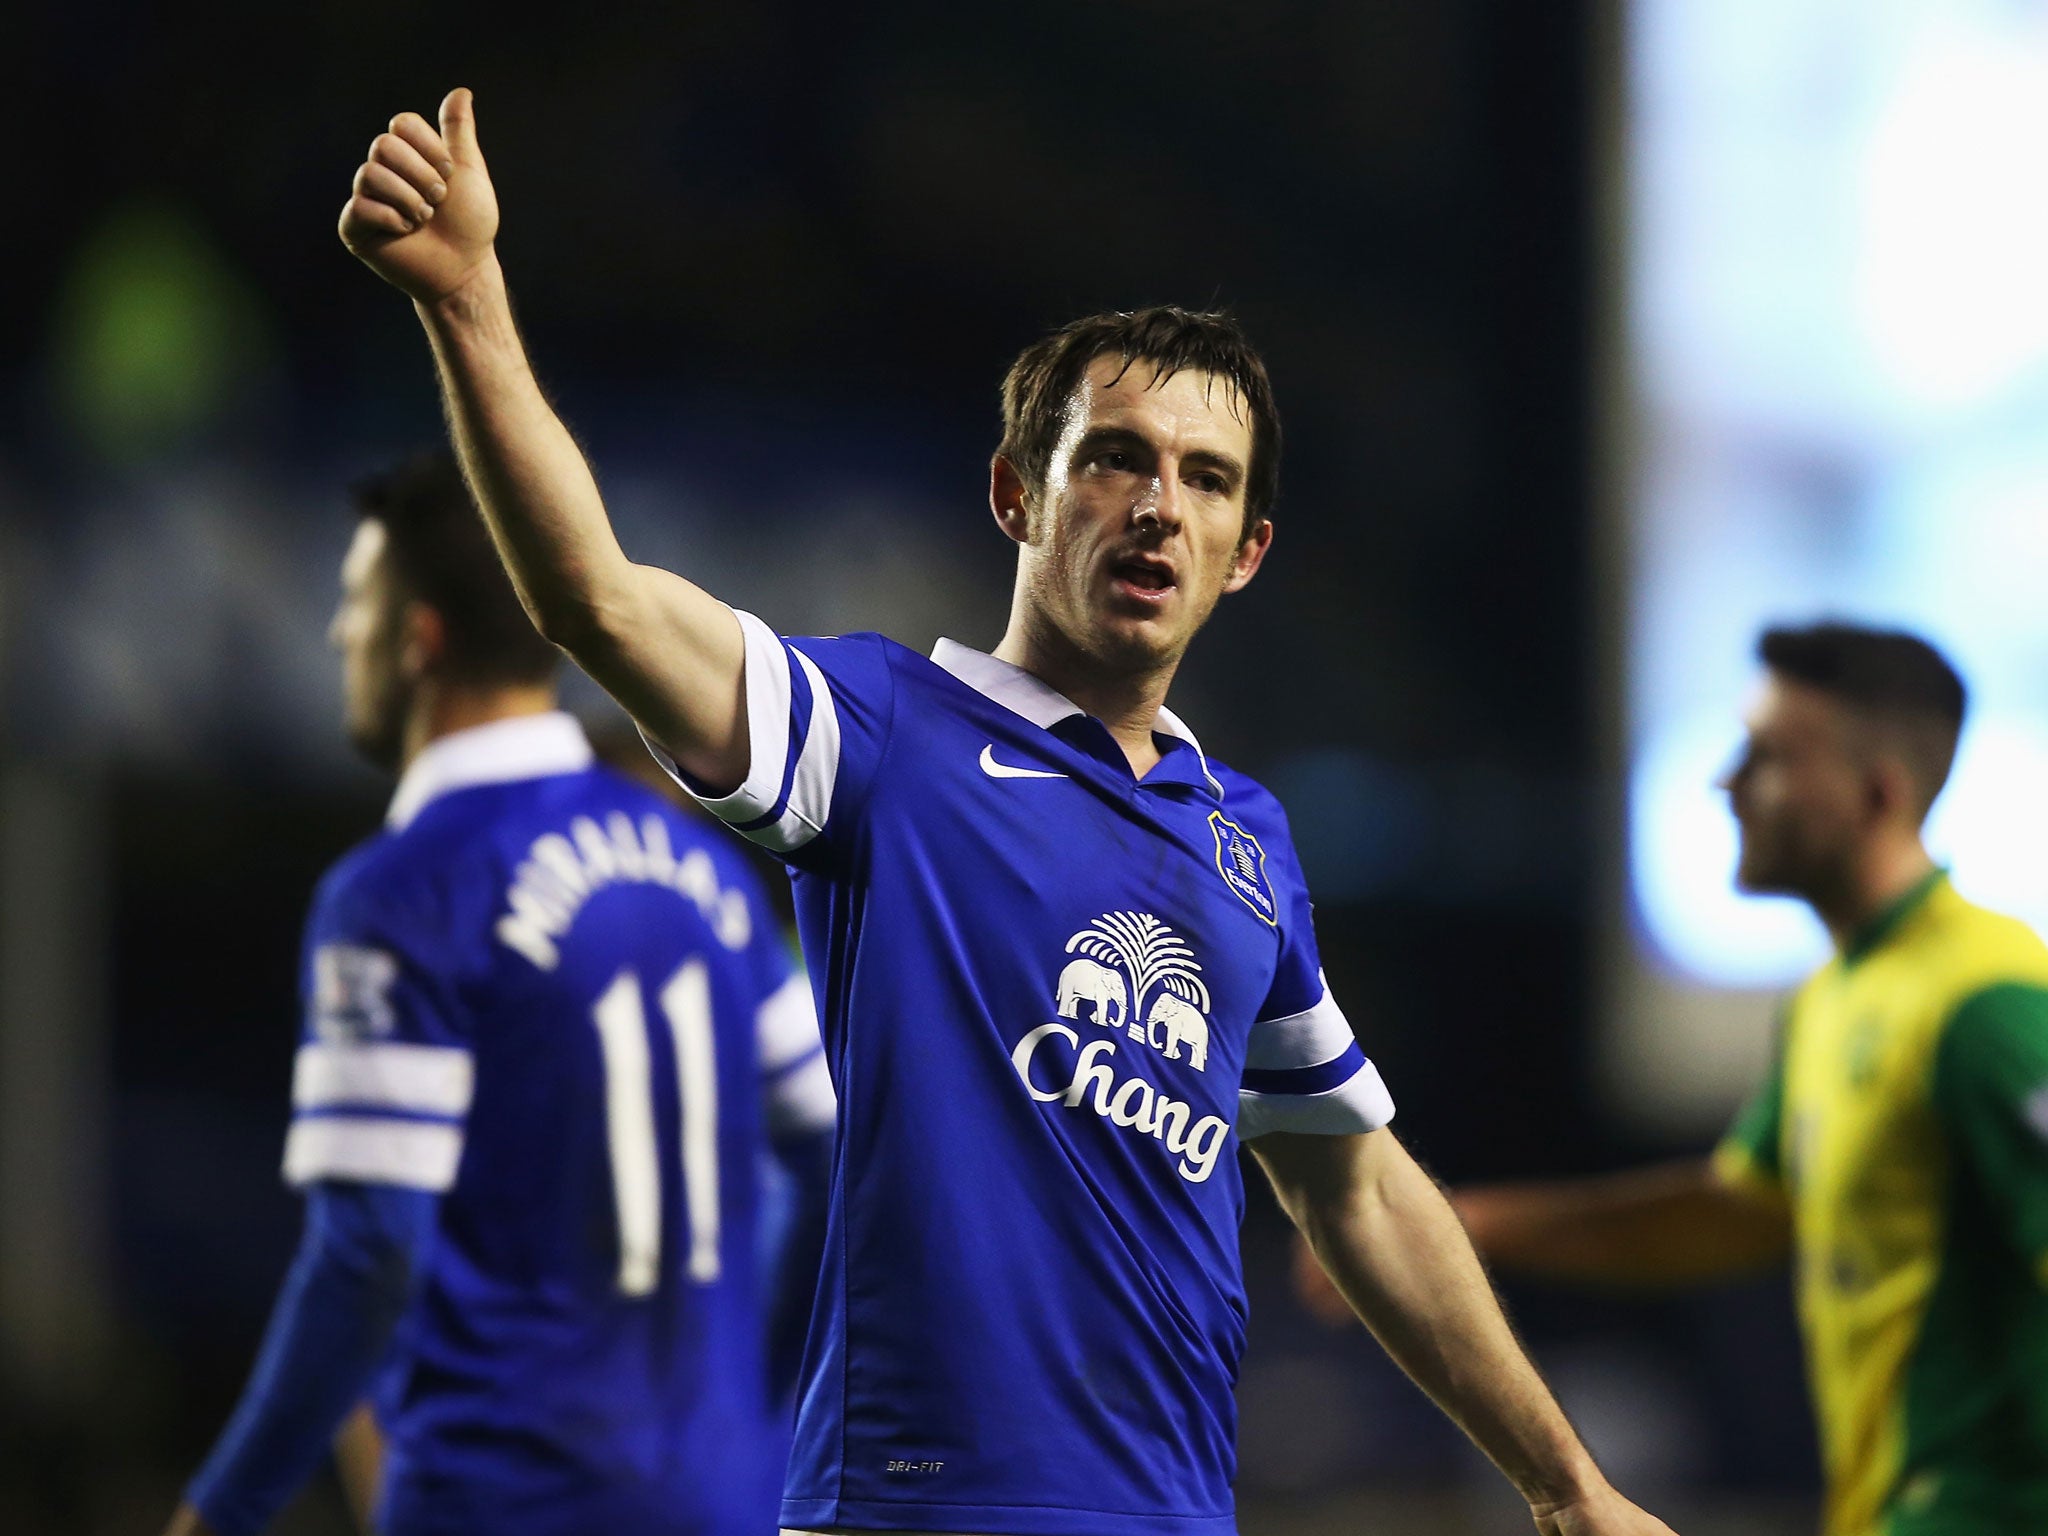 Leighton Baines has signed a new four-year contact with Everton